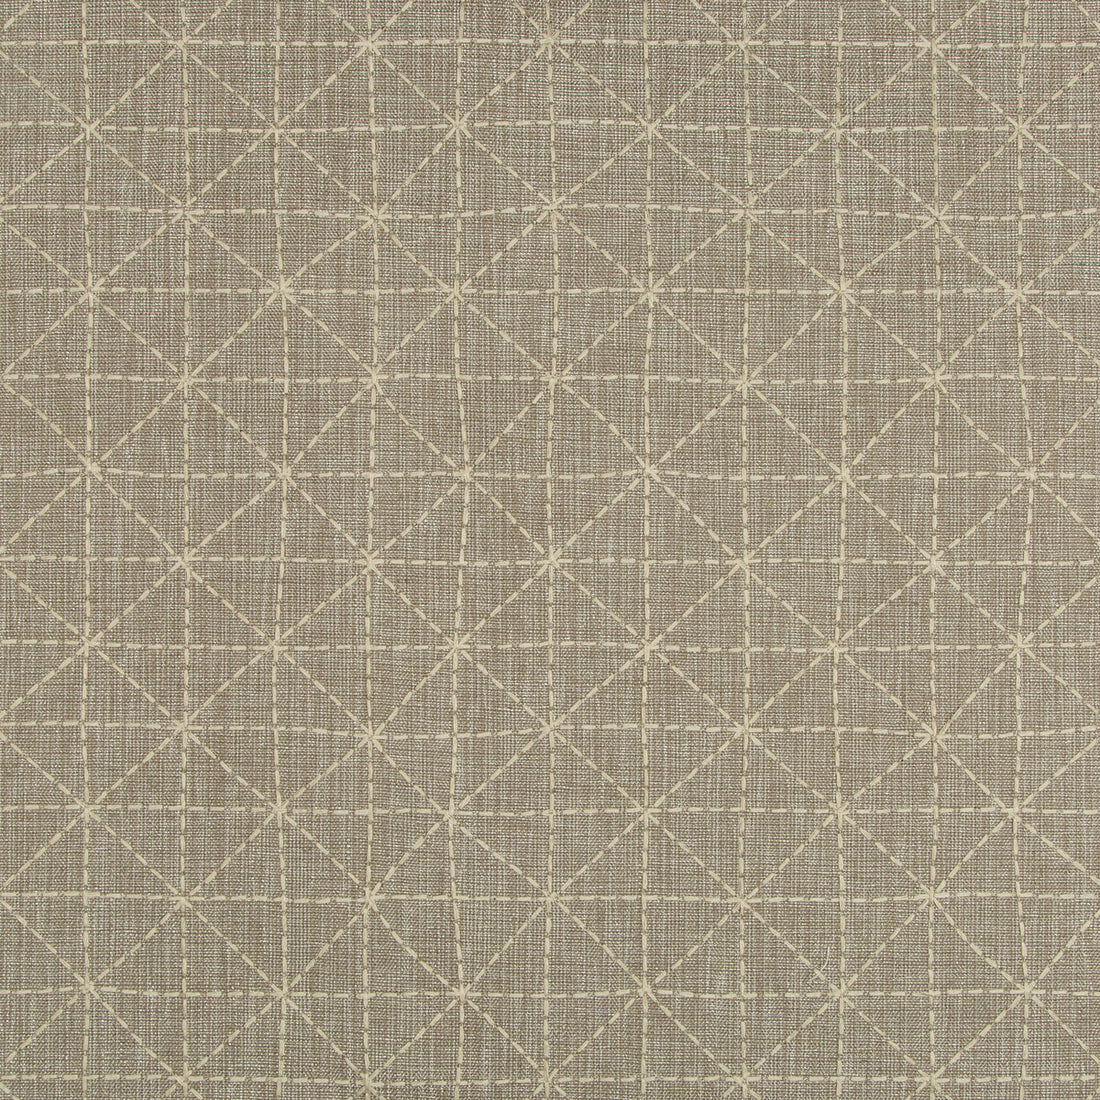 Appointed fabric in stone color - pattern 35380.11.0 - by Kravet Design in the Nate Berkus Well-Traveled collection